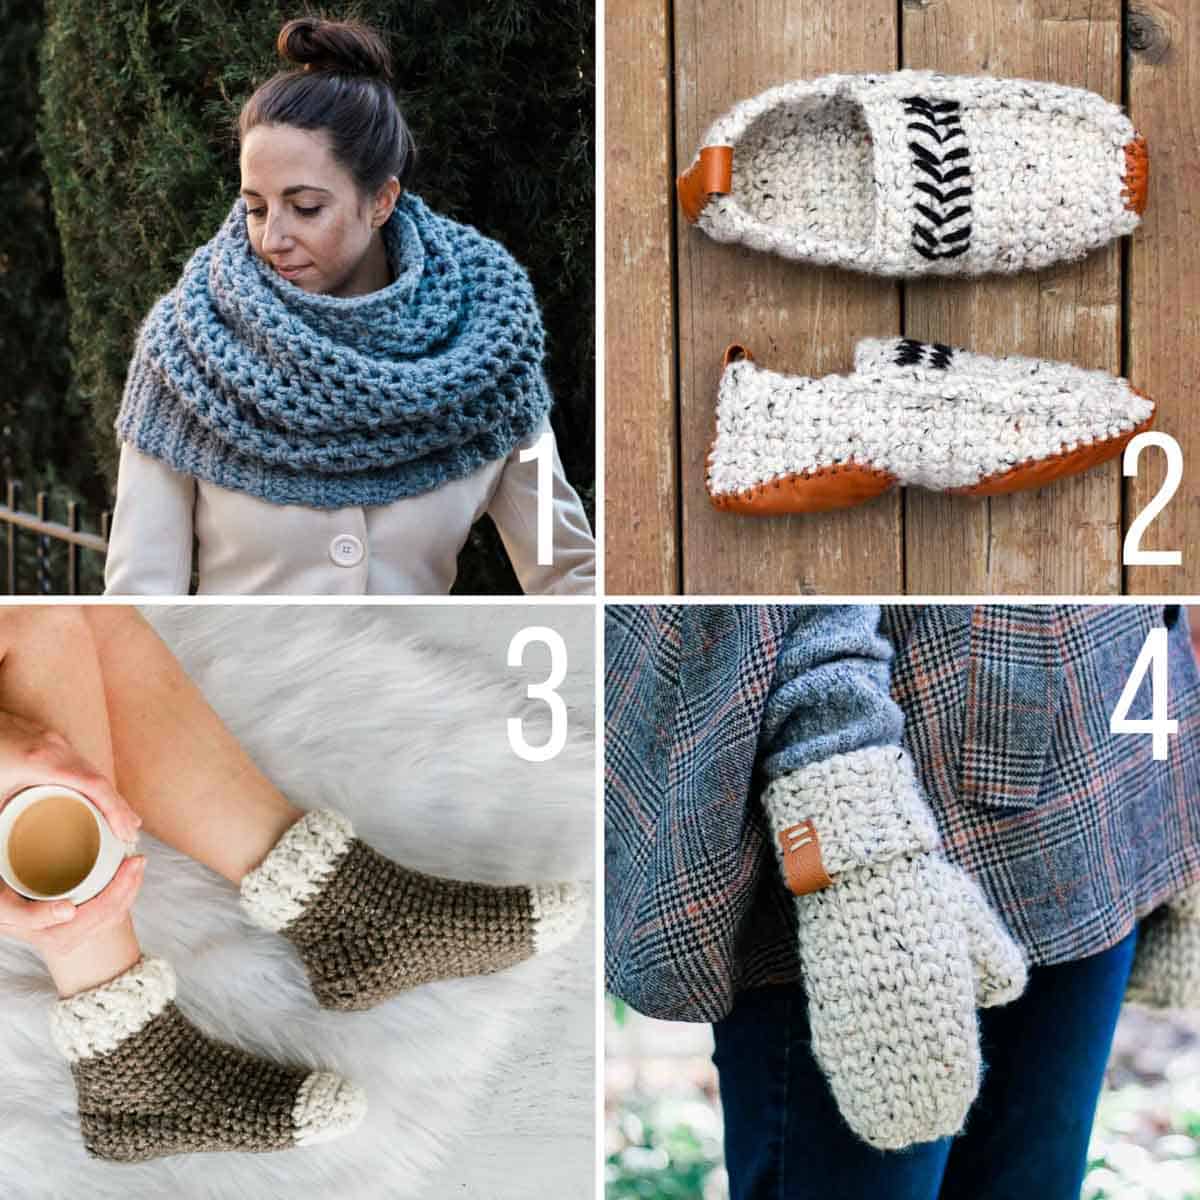 Quick crochet patterns including a chunky cowl, knit-look mittens, and slippers.